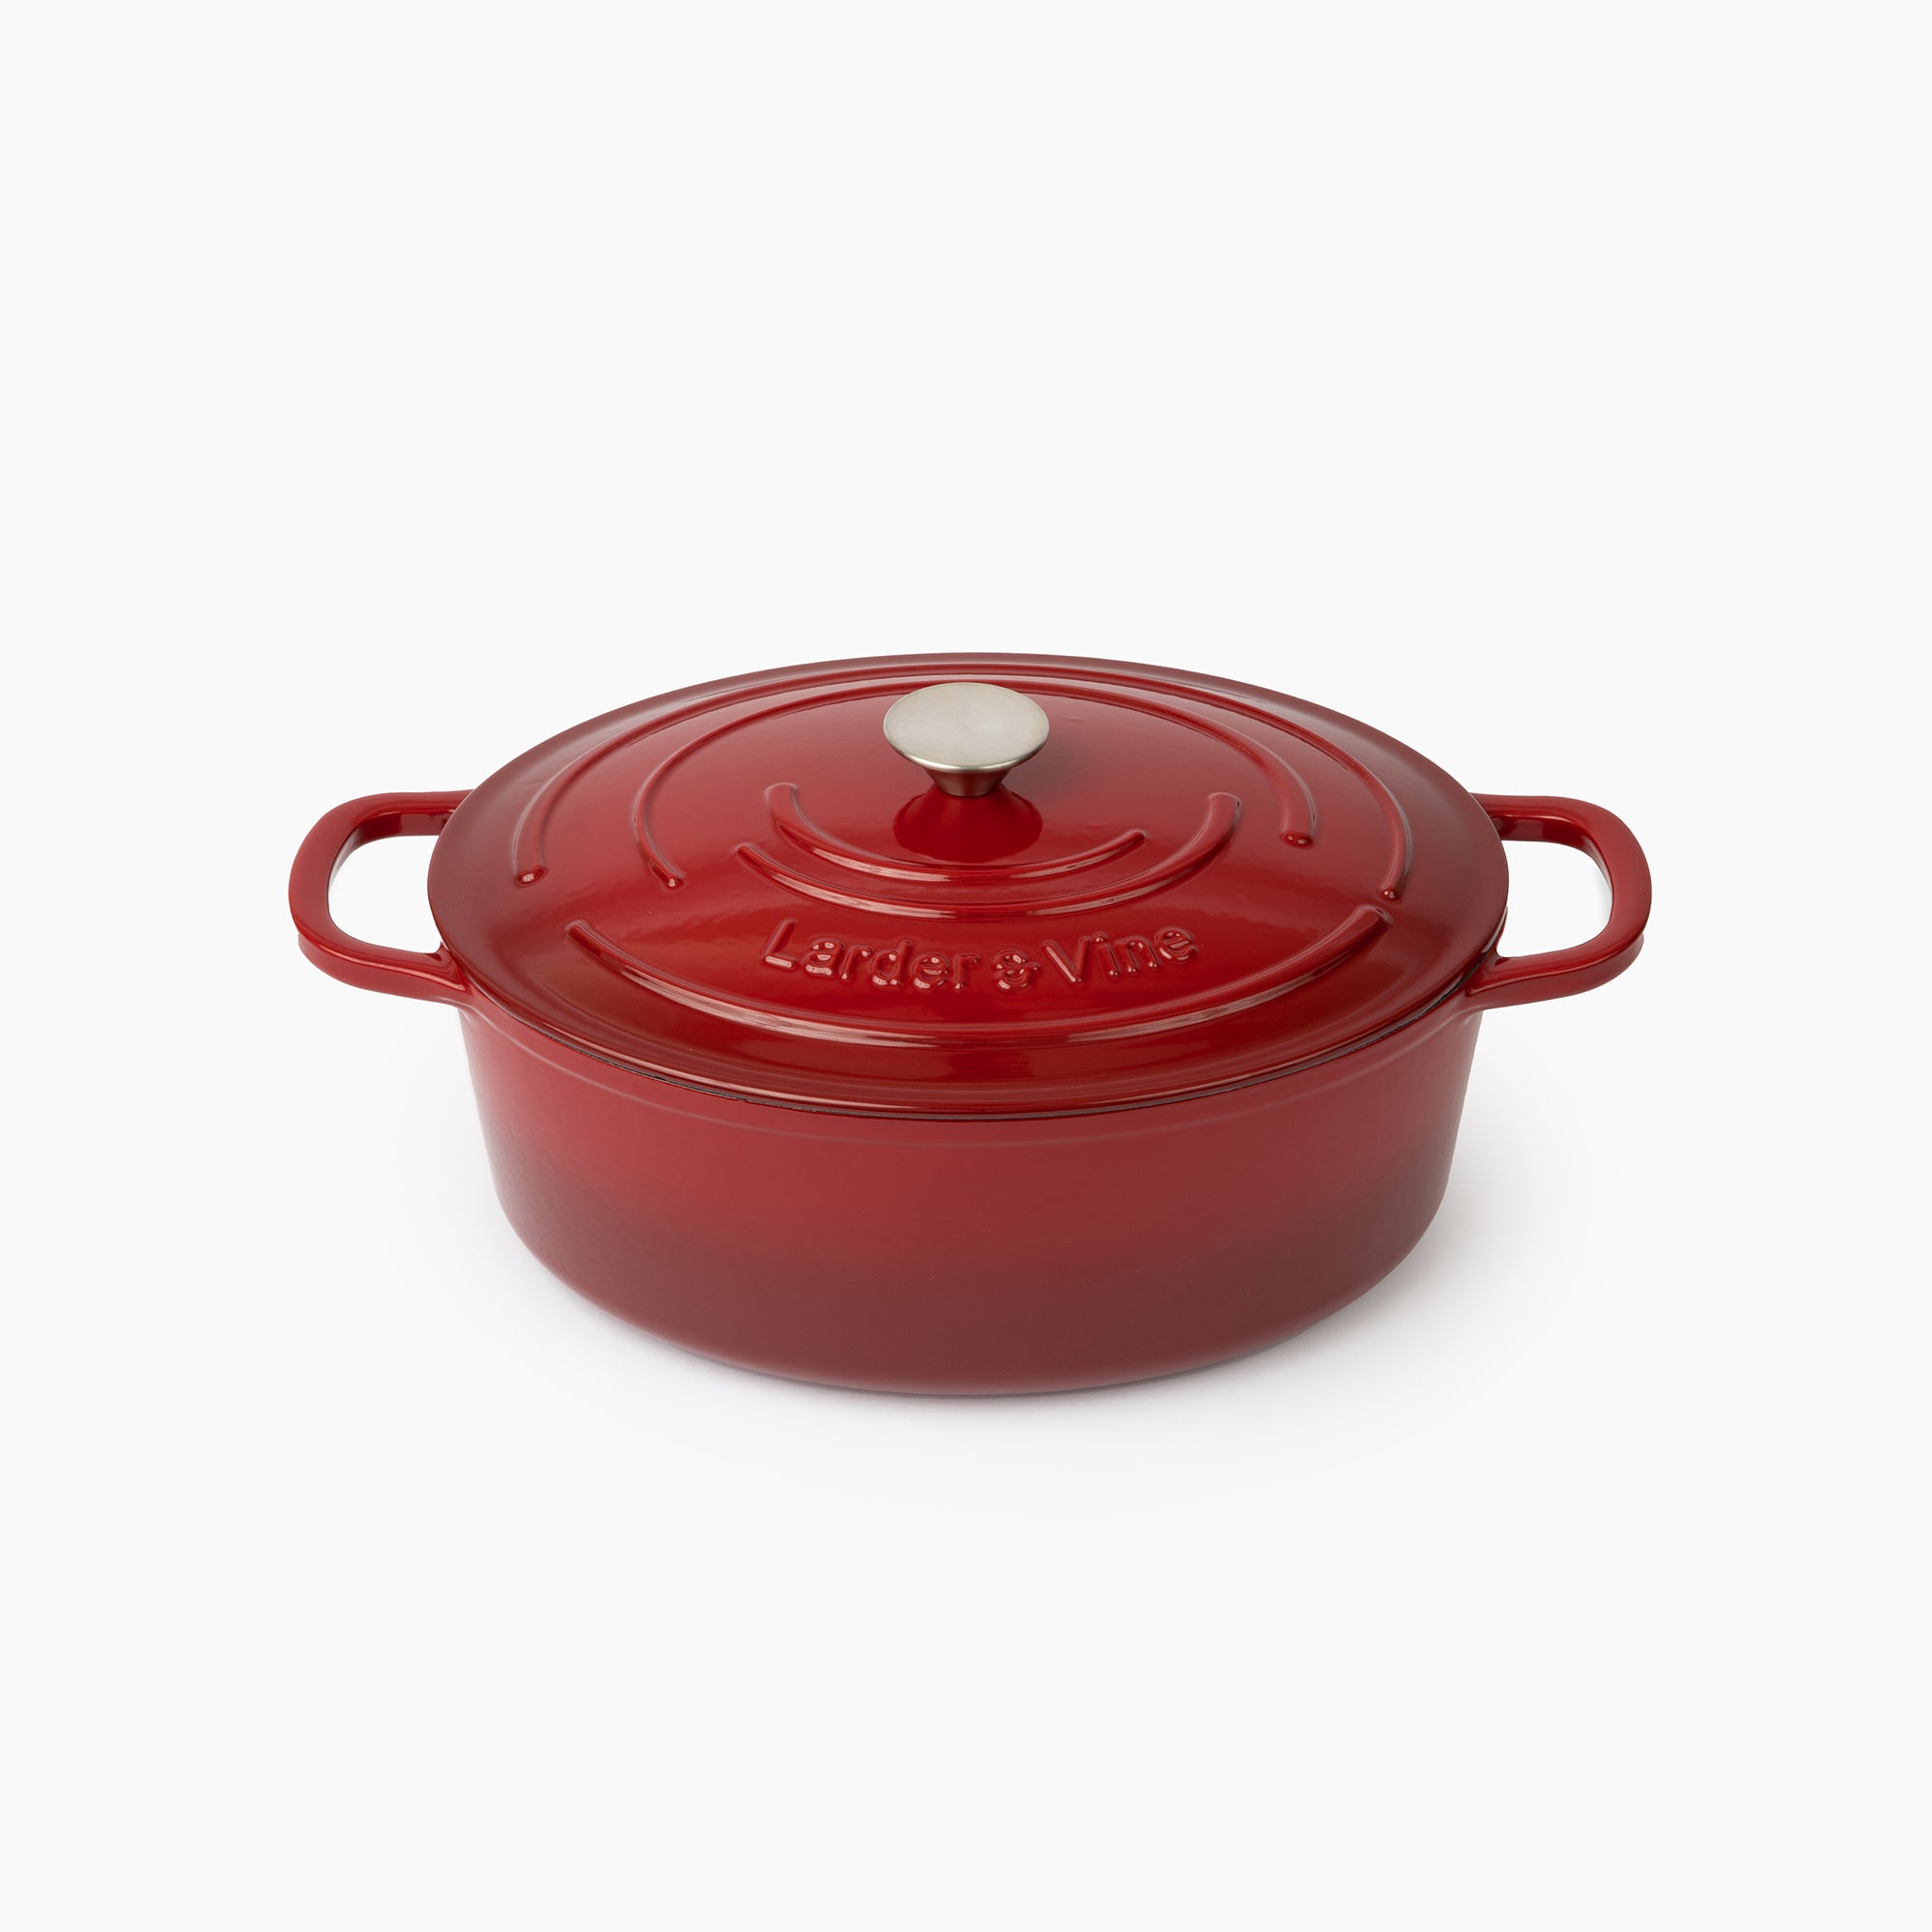 American Collection Stock Pot Enameled Cast Iron Oval Dutch Oven